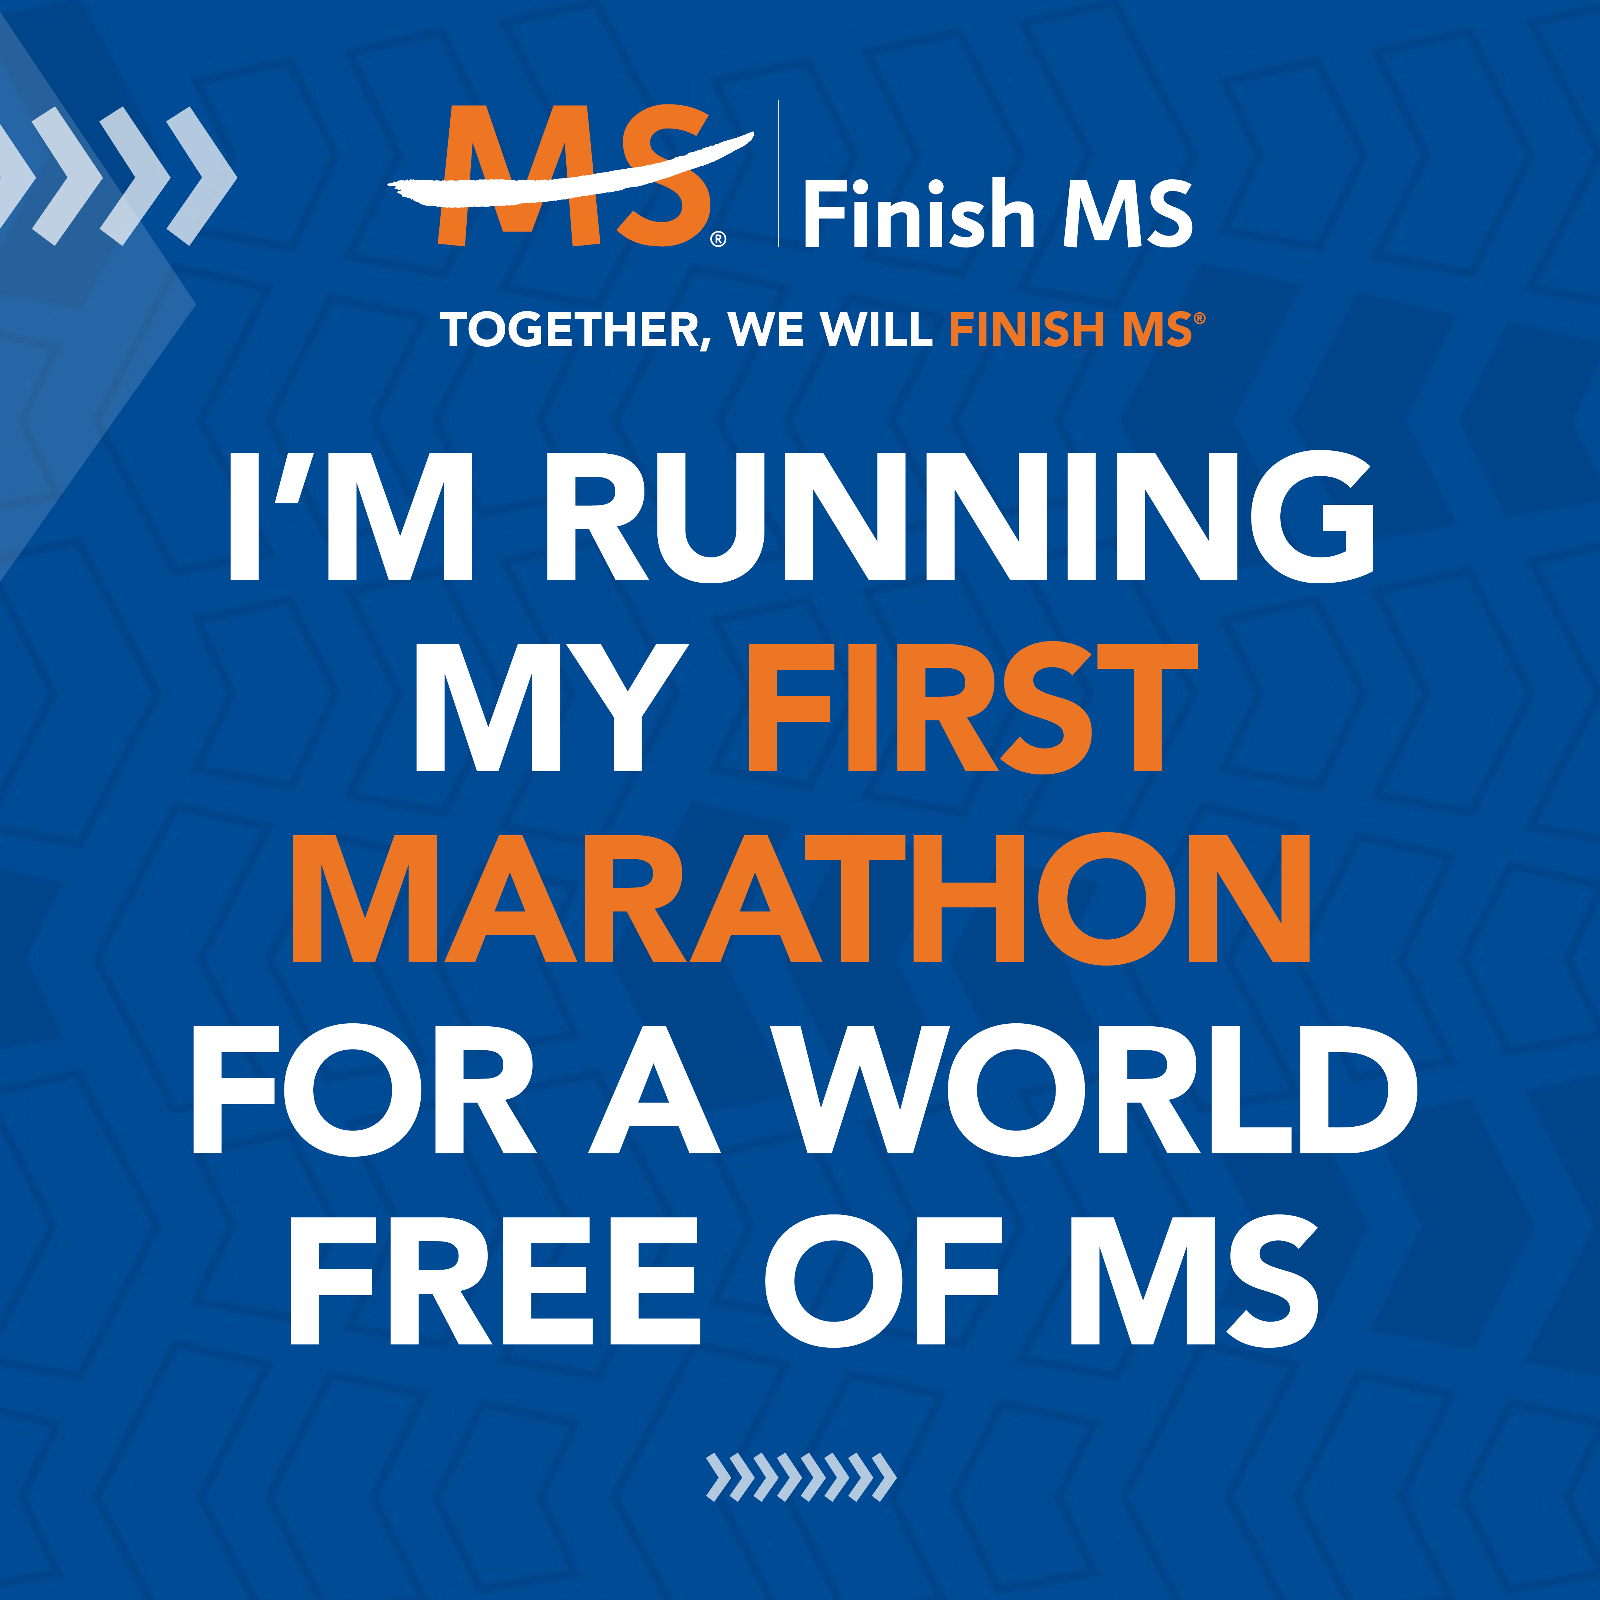 Finish MS - I'm Running My First Marathon For a World Free of MS